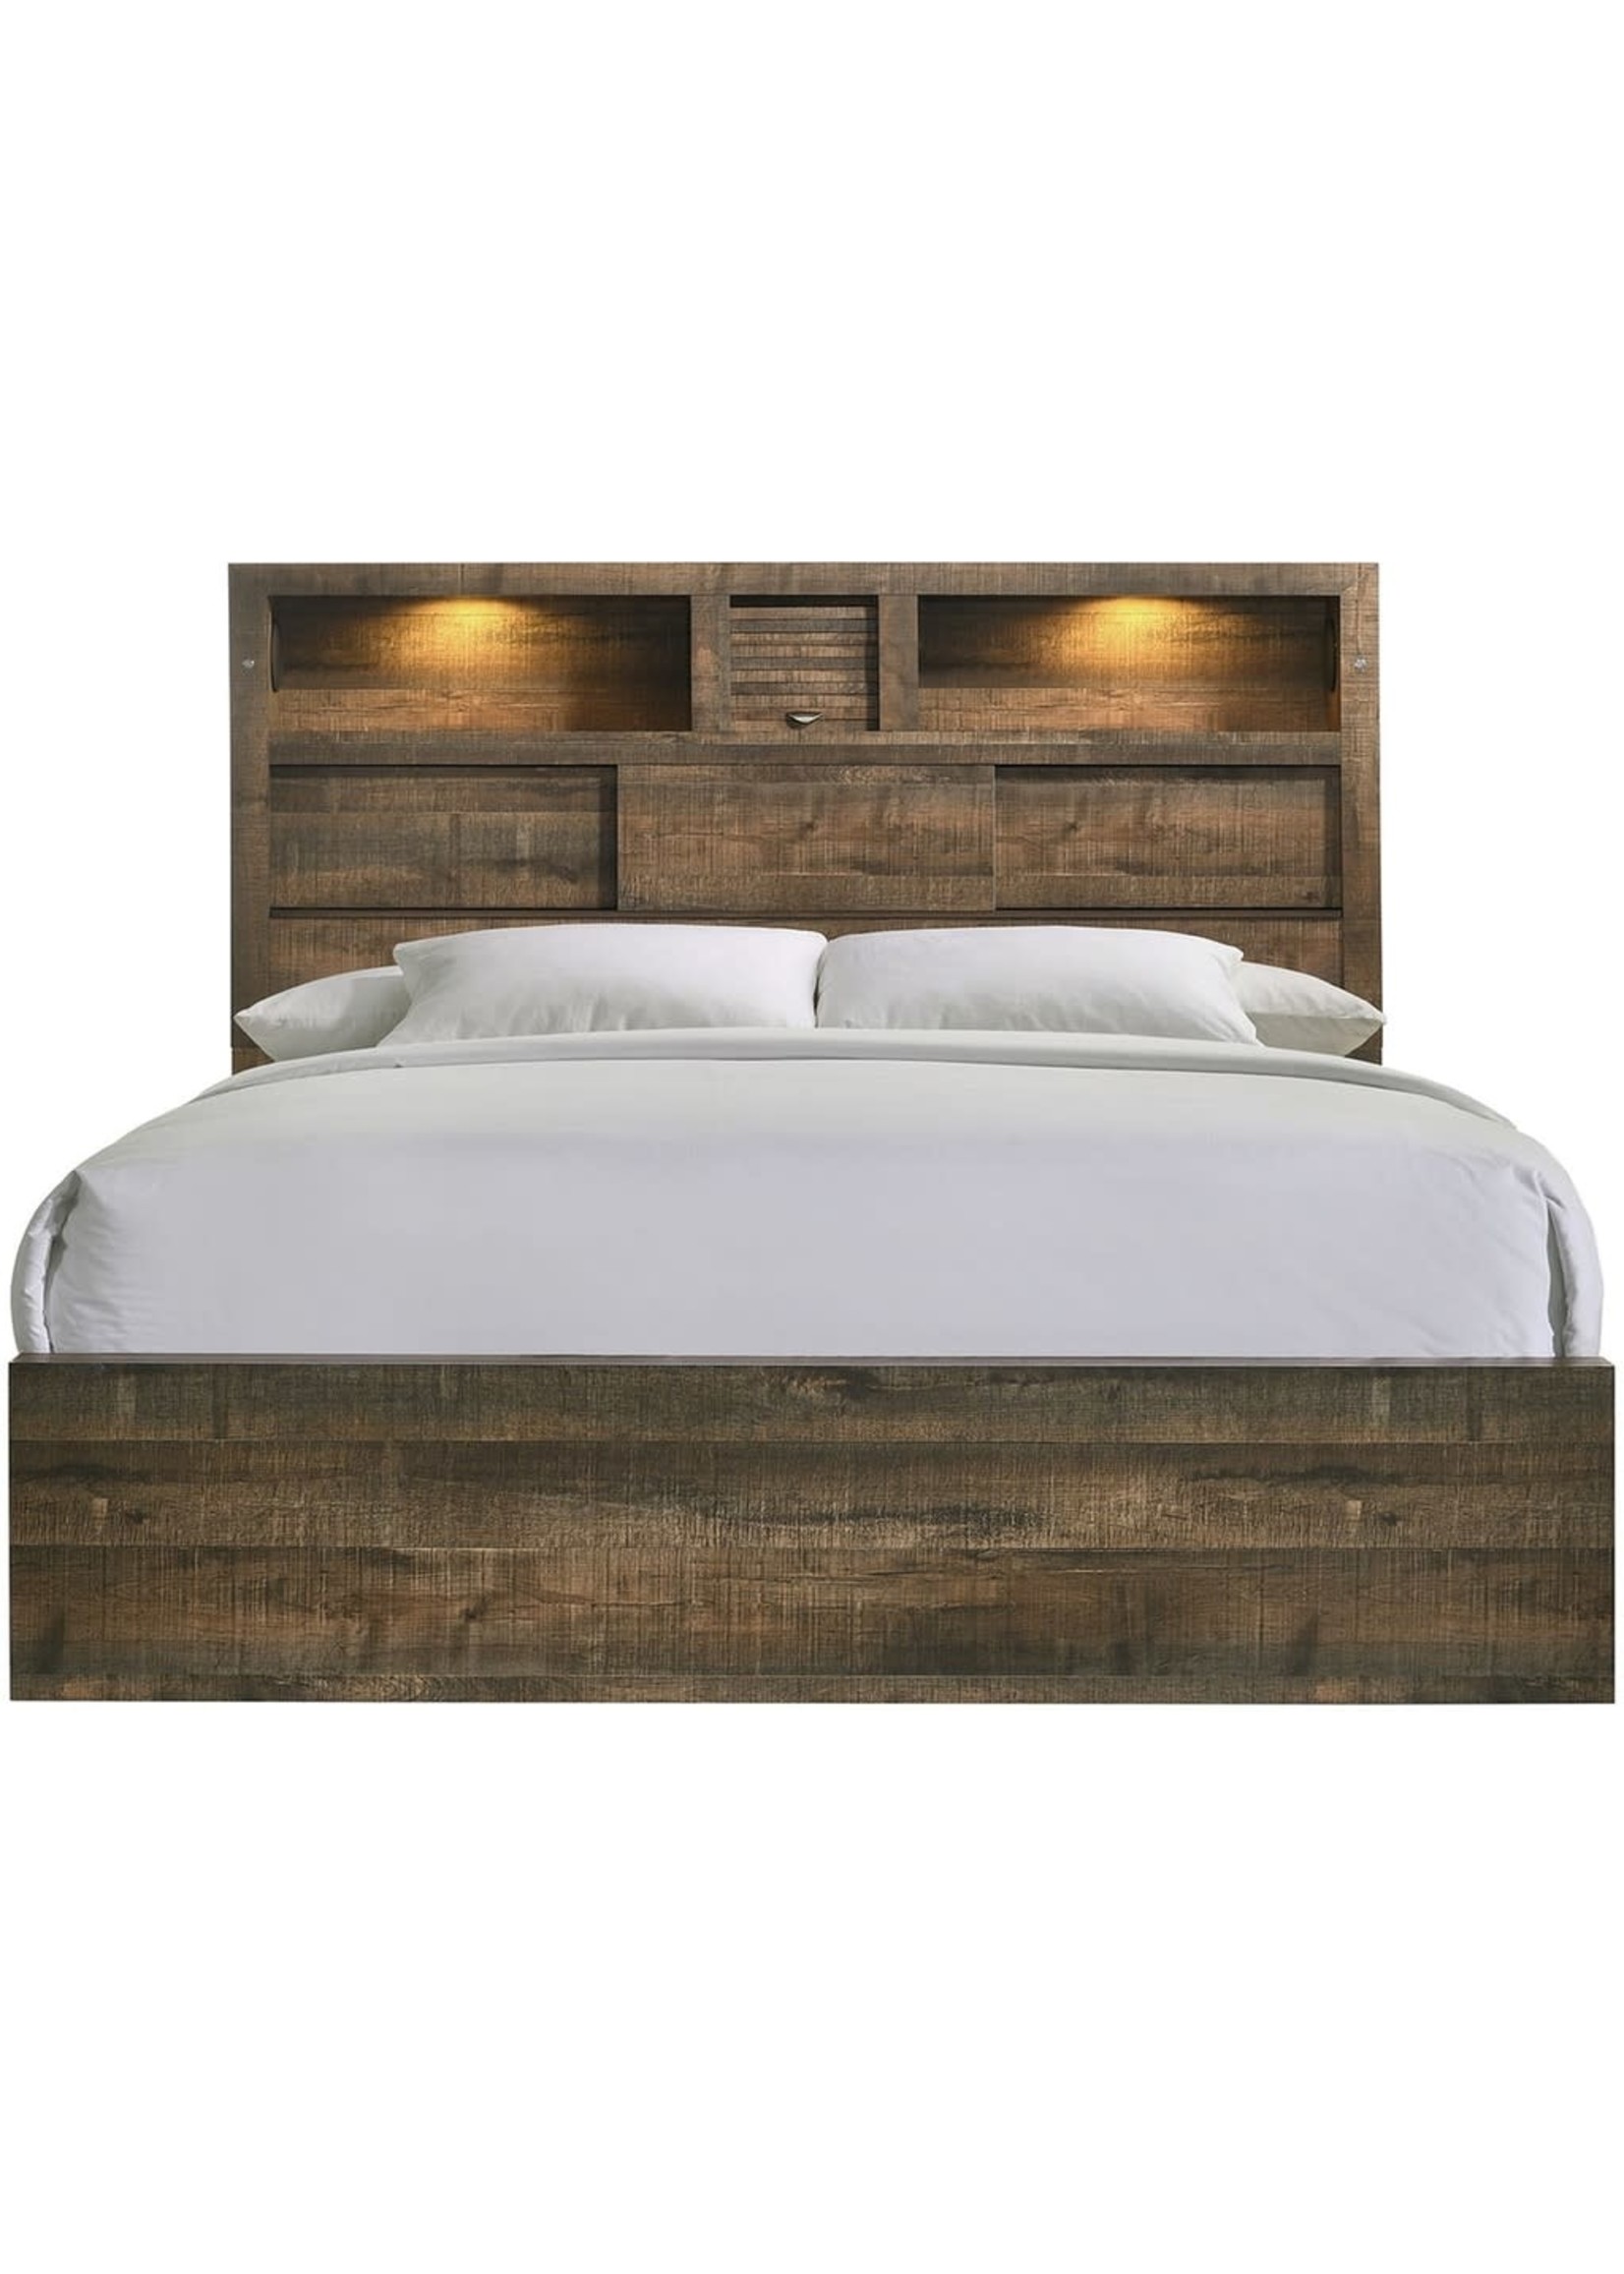 Bed Bailey Drift Finish Storage Hb, Queen Headboard With Lights And Storage